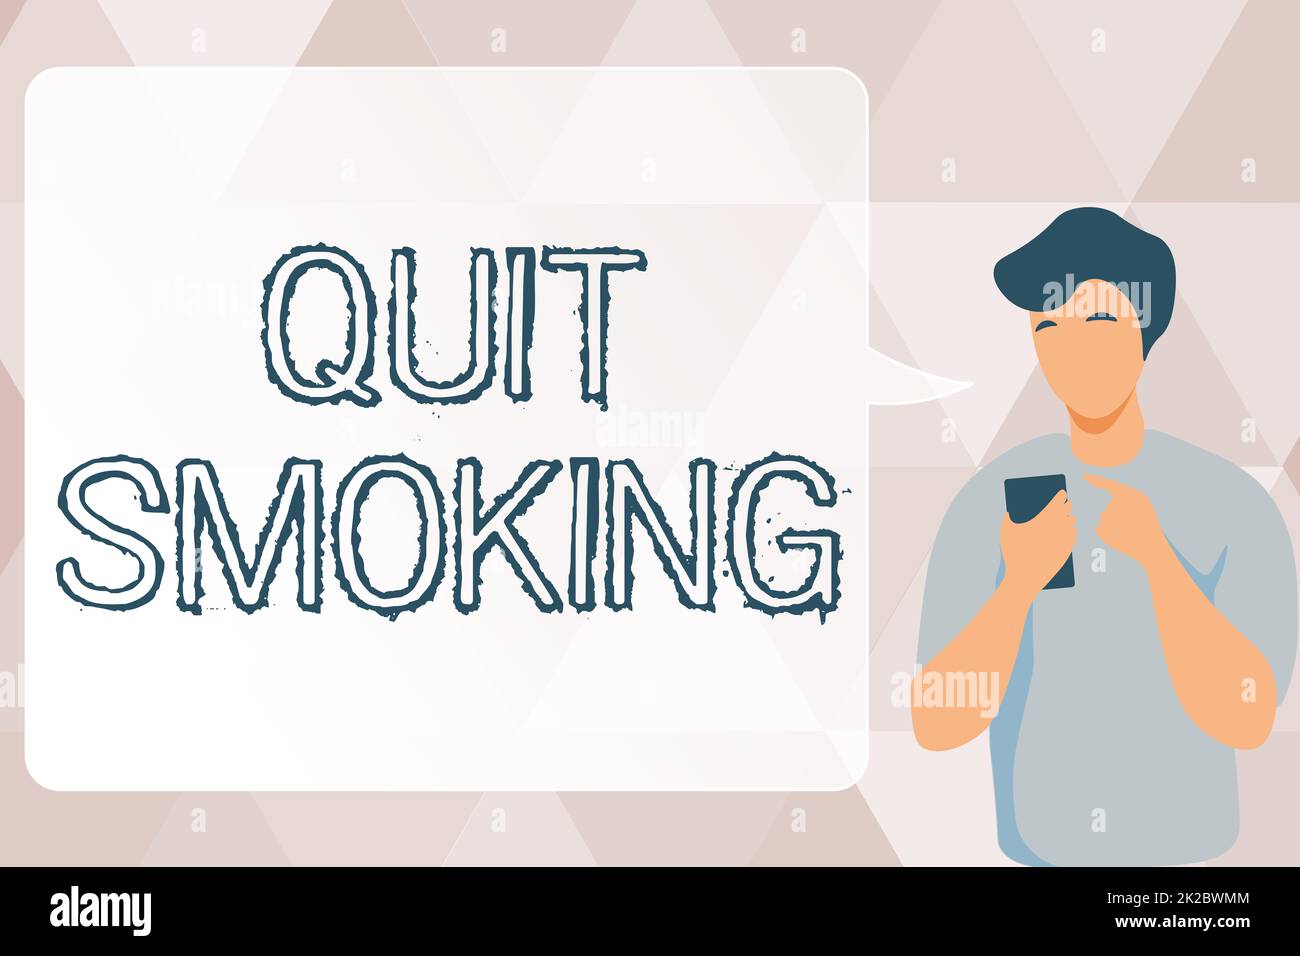 Text showing inspiration Quit Smoking. Business concept process of discontinuing tobacco and any other smokers Man Illustration Using Mobile And Displaying Speech Bubble Conversation. Stock Photo